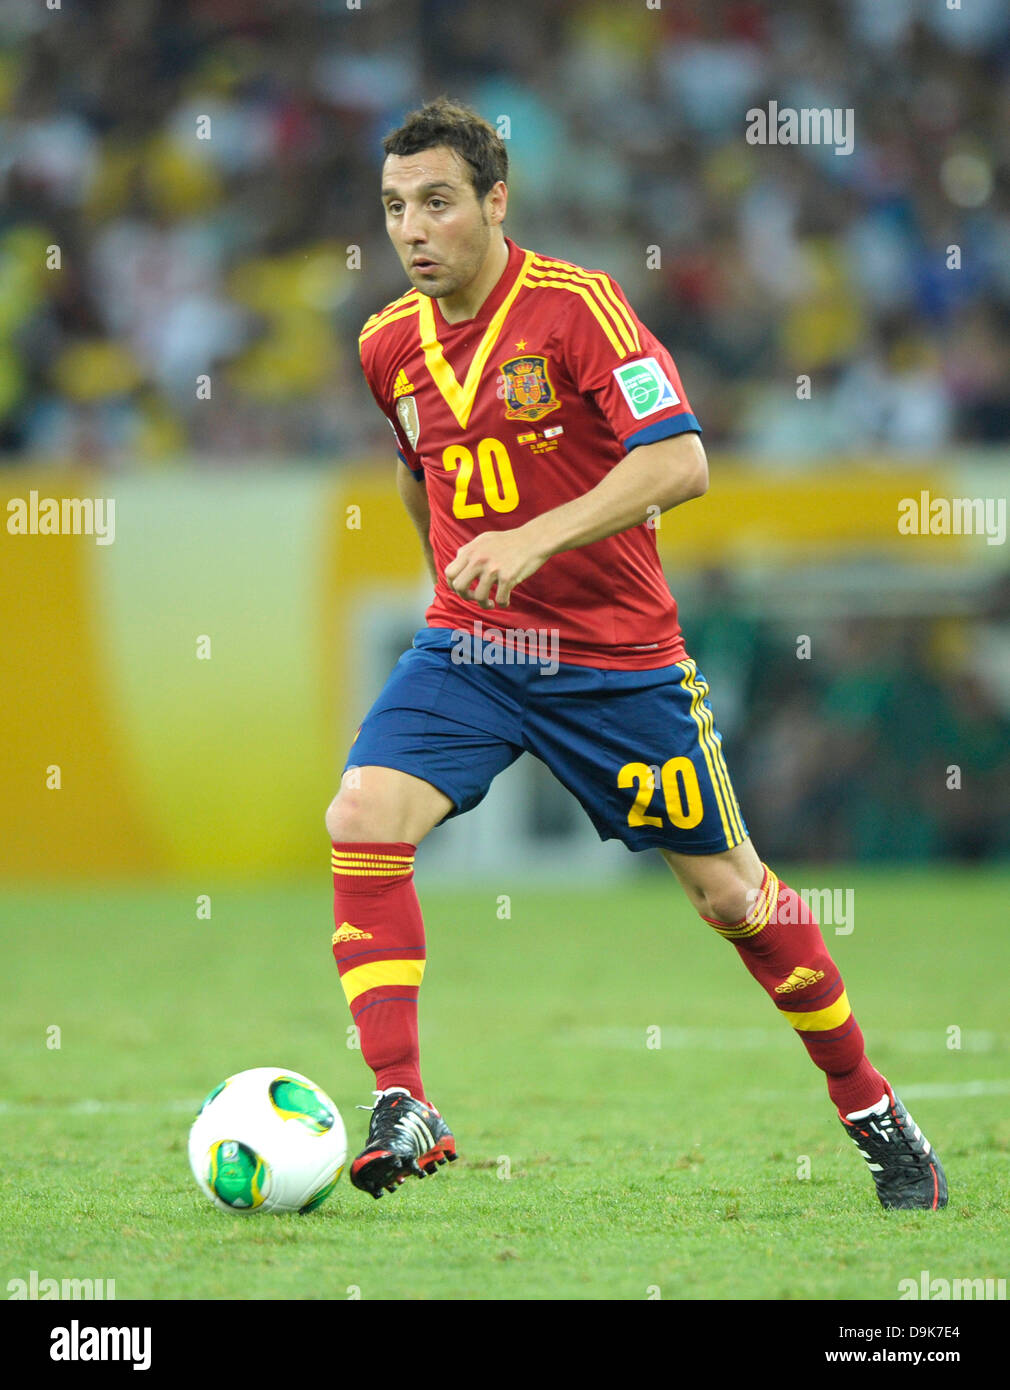 Rio de Janeiro, Brazil. 20th June, 2013. Confederations Cup group B match between Spain and Tahiti (10:0) at Maracana stadium in Rio de Janeiro, Brazil, Thursday, June 20, 2013. Santi Cazorla Credit:  dpa picture alliance/Alamy Live News Stock Photo